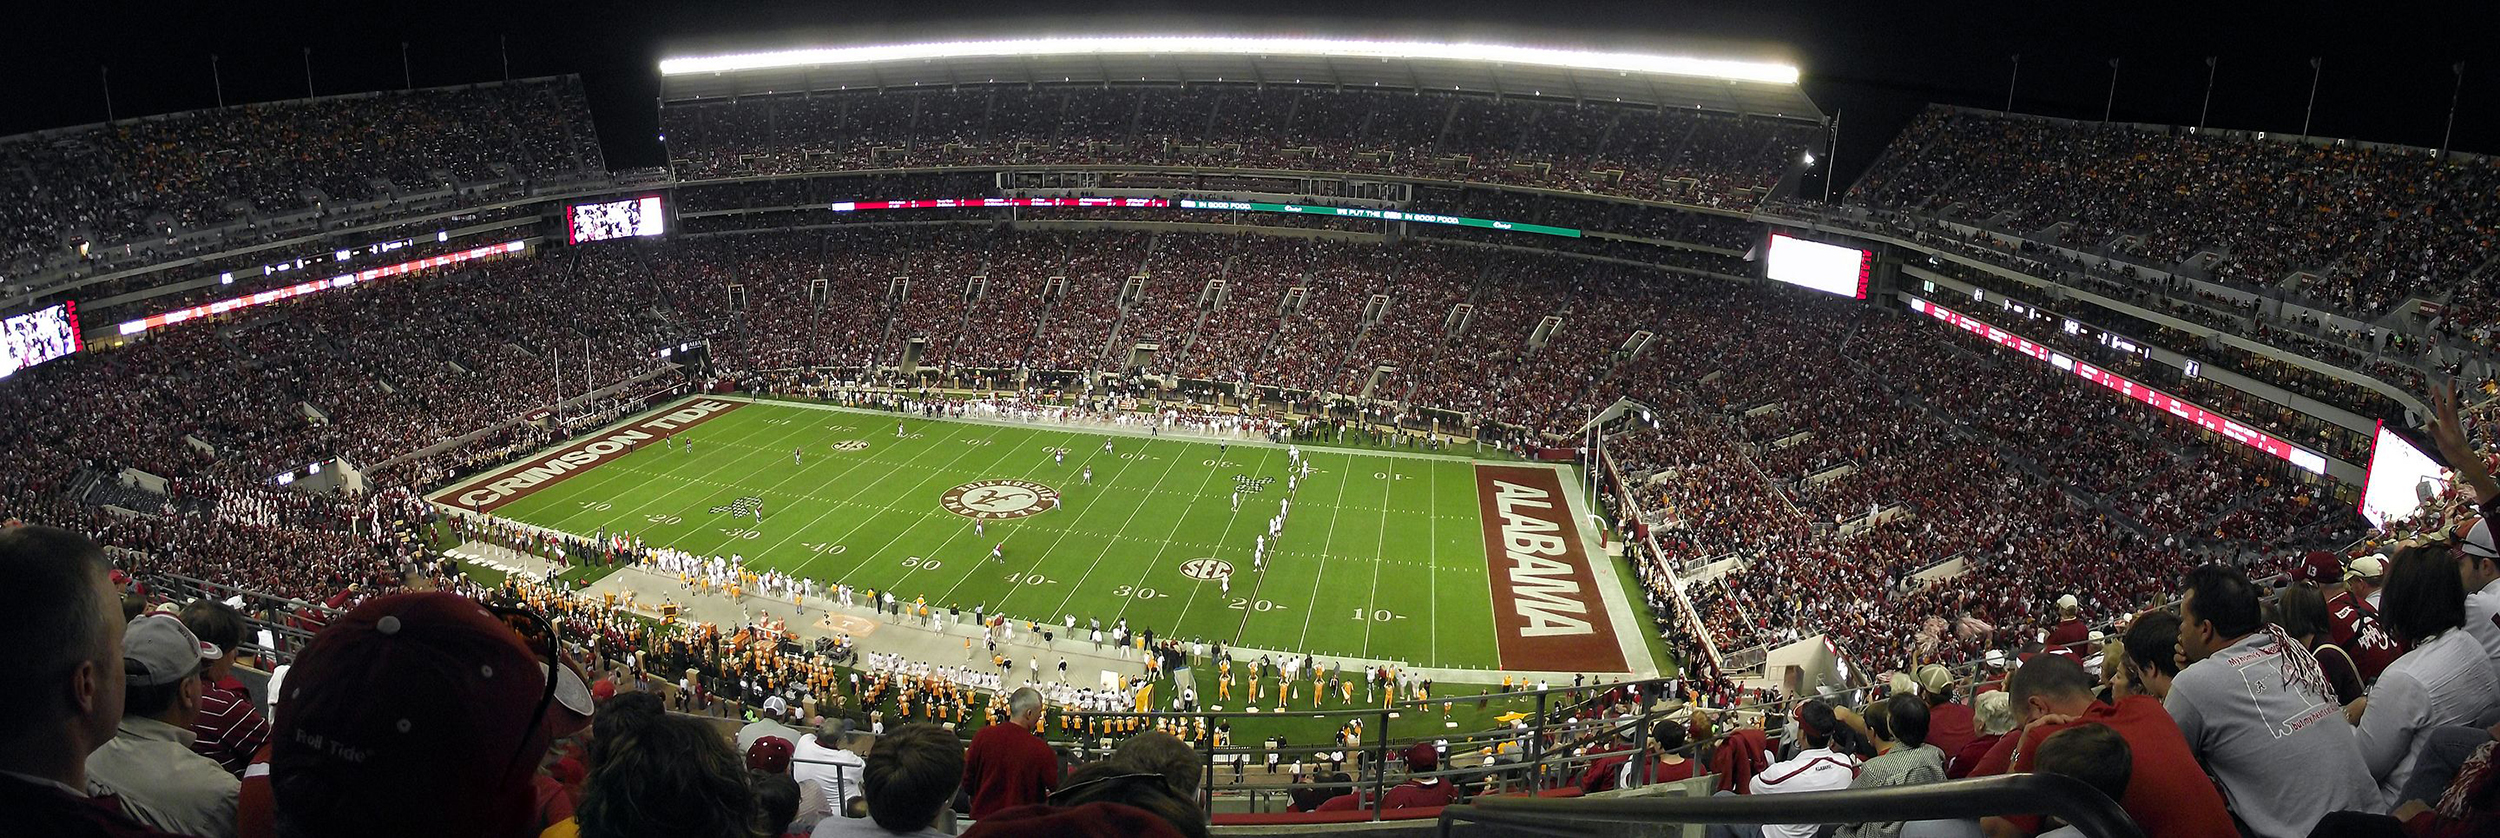 Alabama's football stadium is packed with fans.